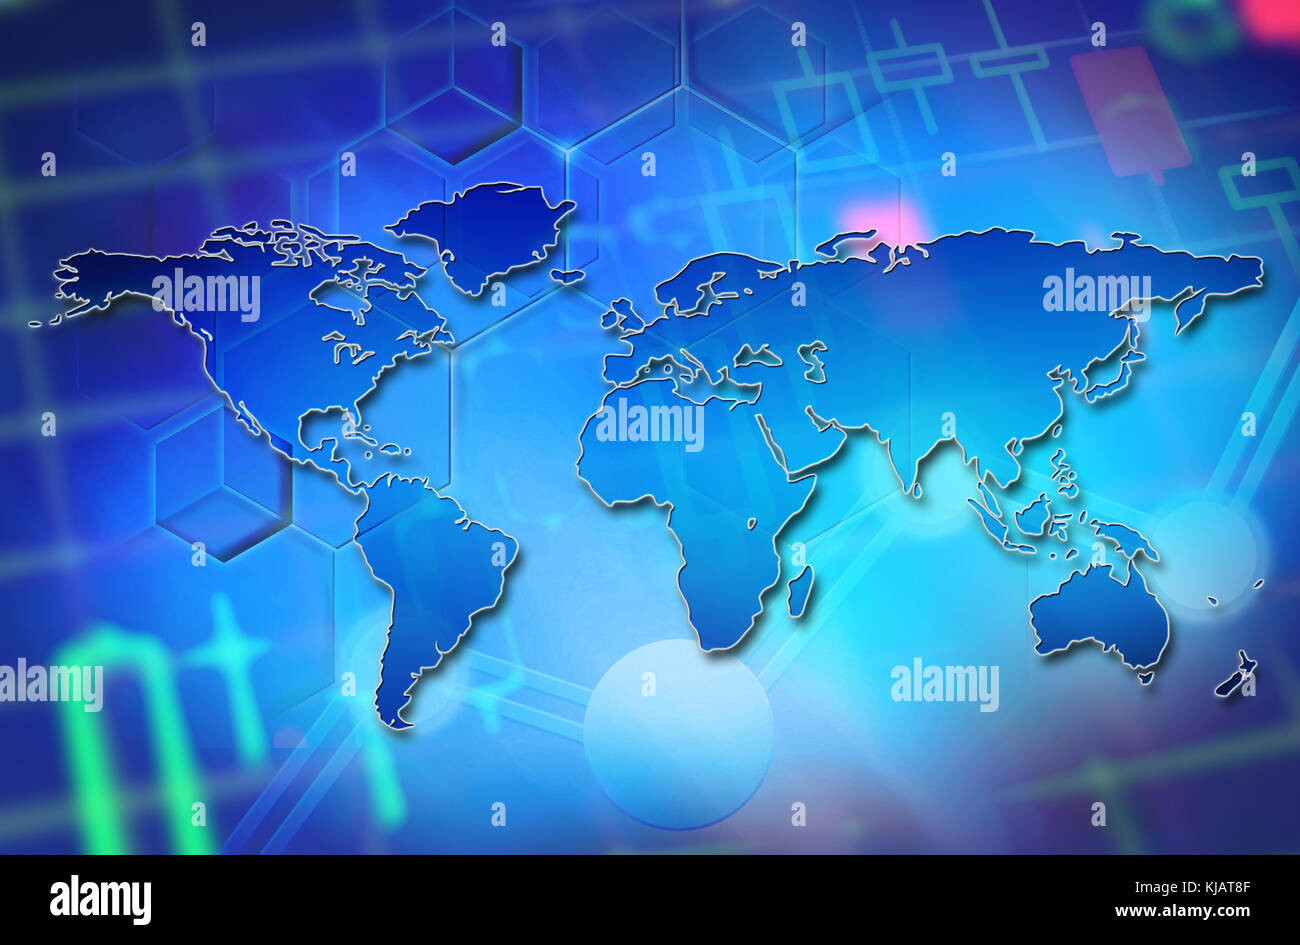 Economy, business, financial background. Economy concept wallpaper, global map at background of stock market chart and data. Blue background for news. Stock Photo